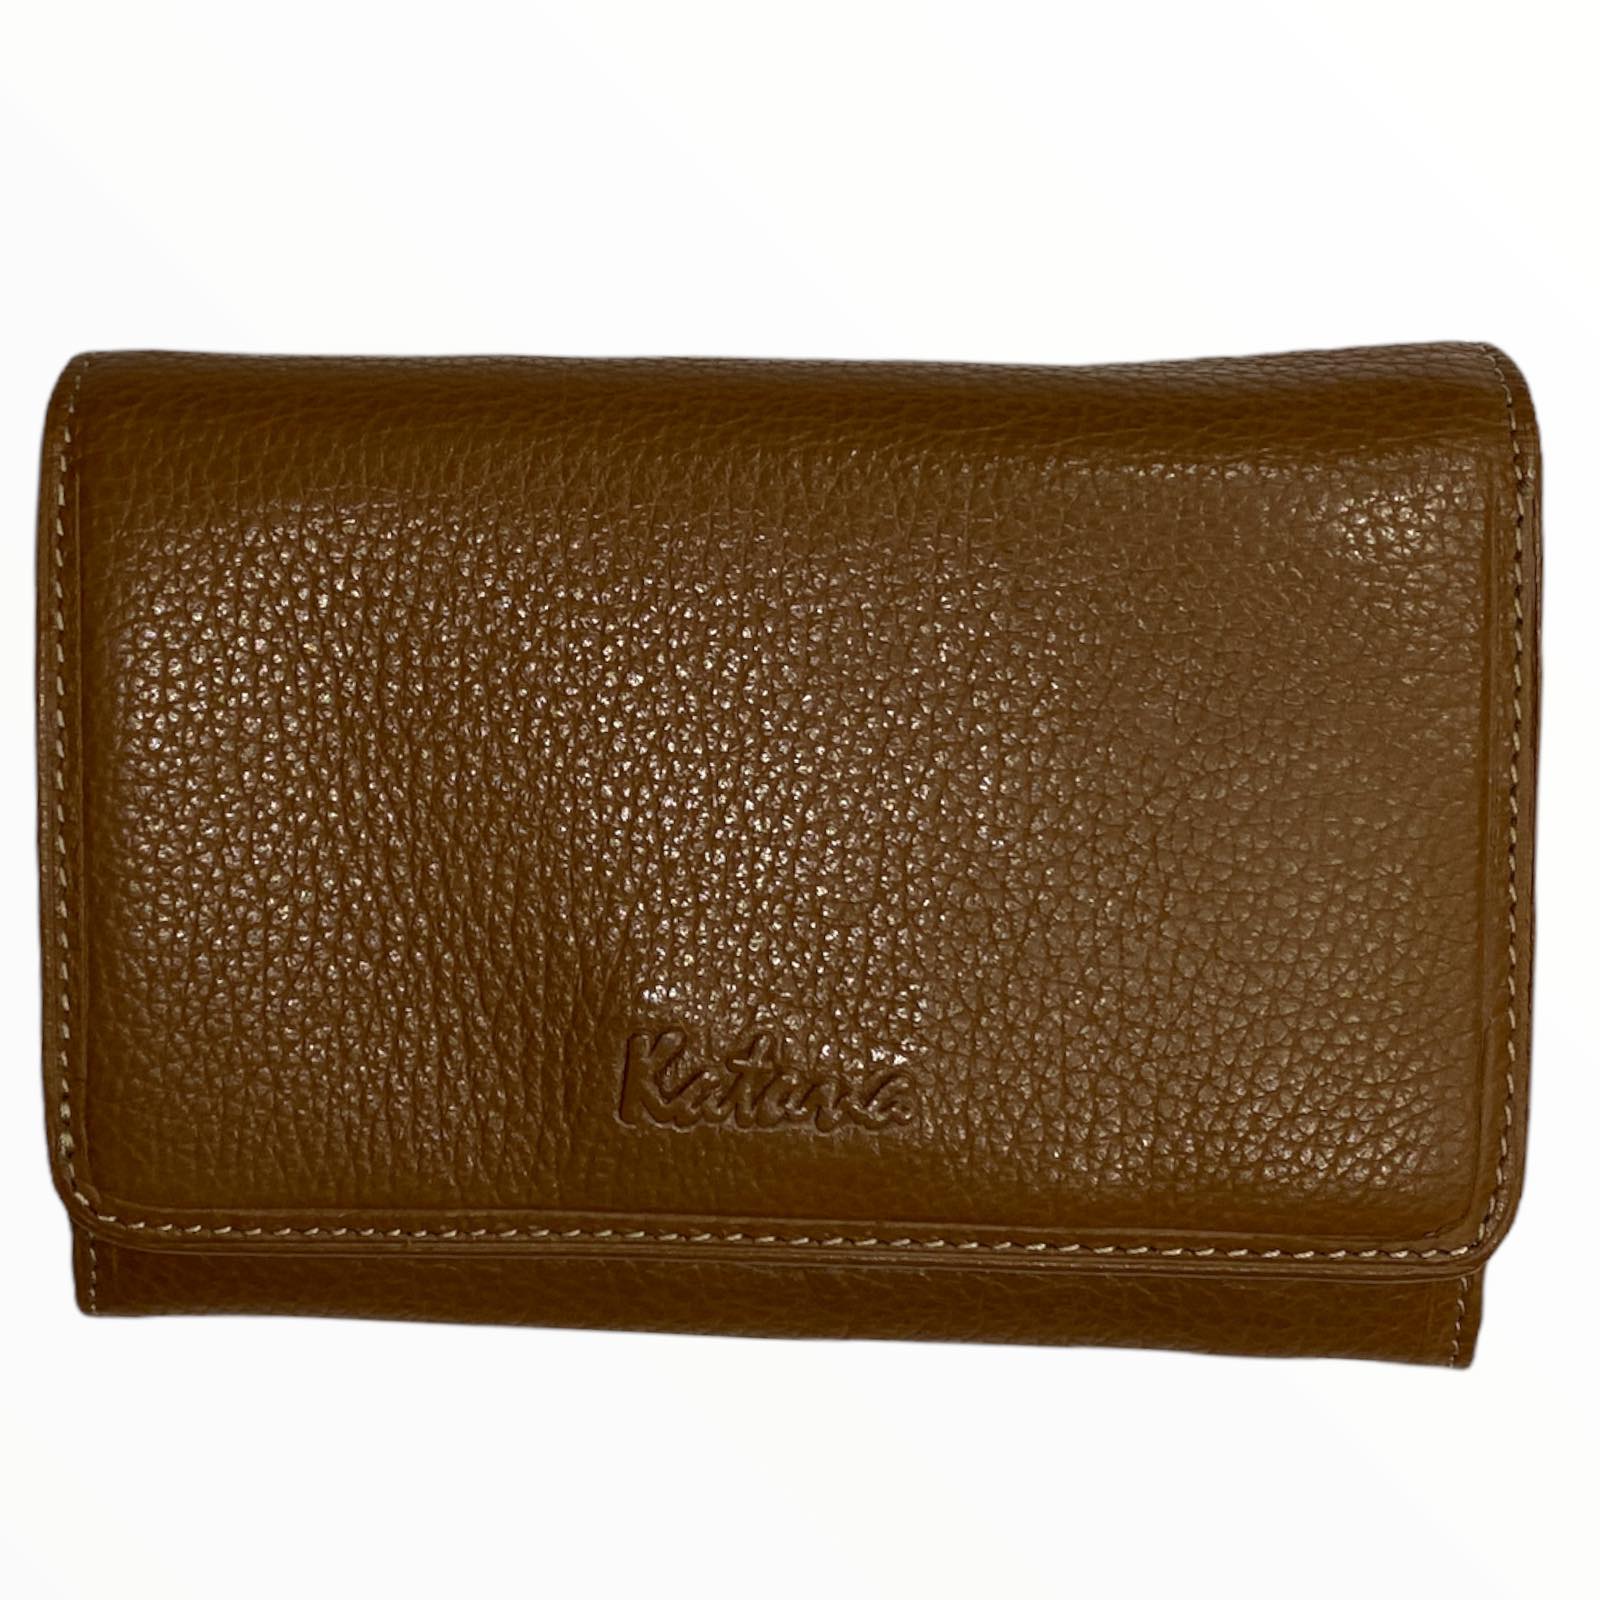 Taba small leather wallet